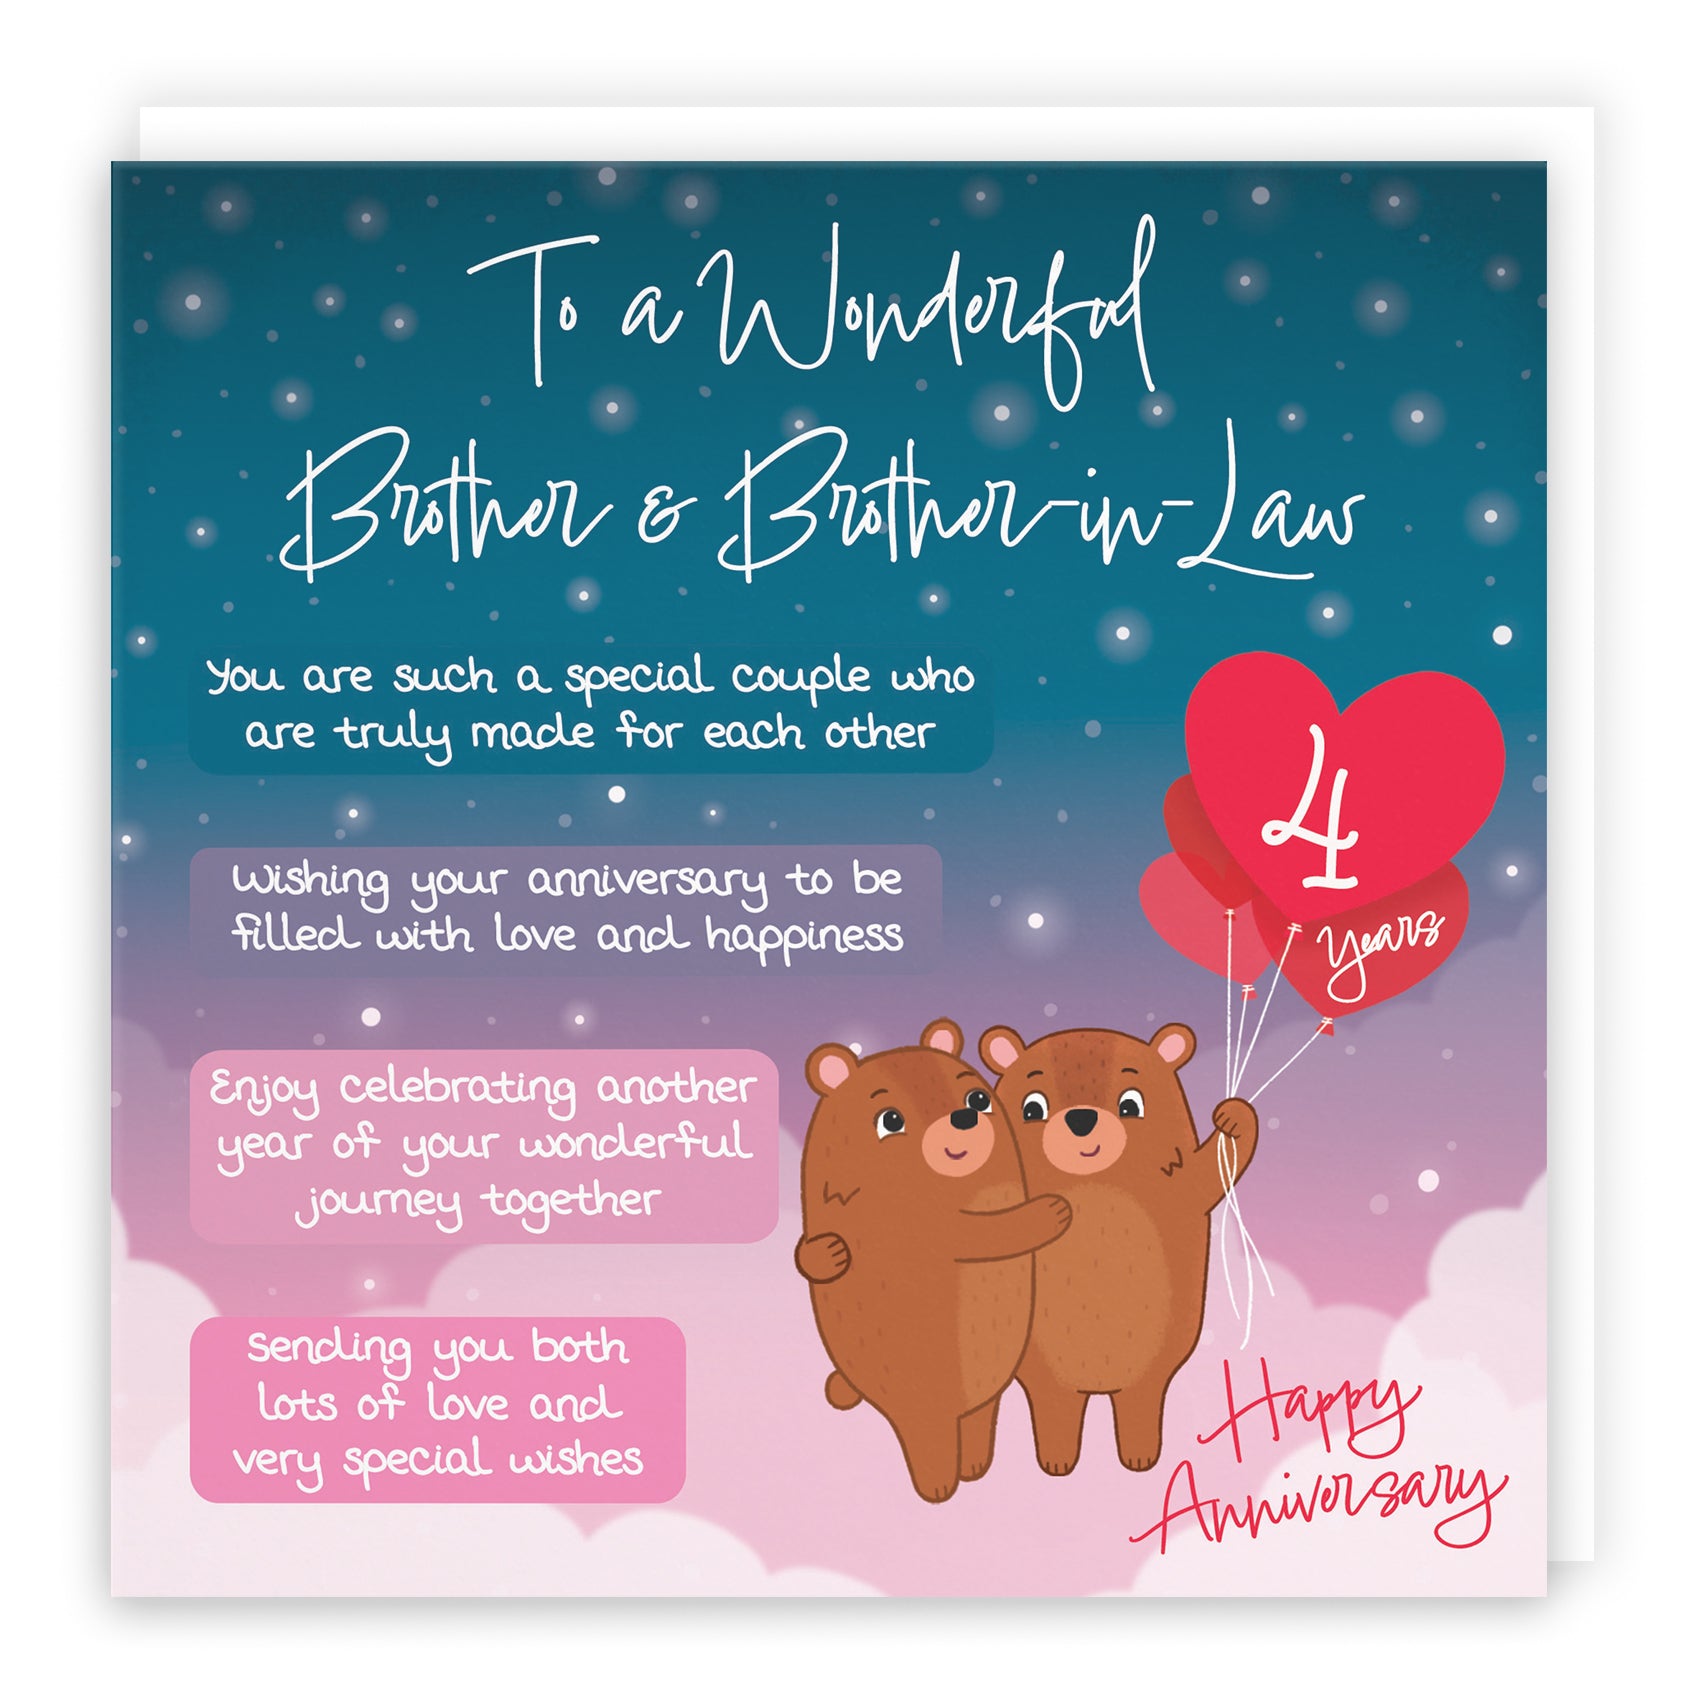 Brother And Brother In Law 4th Anniversary Card Starry Night Cute Bears